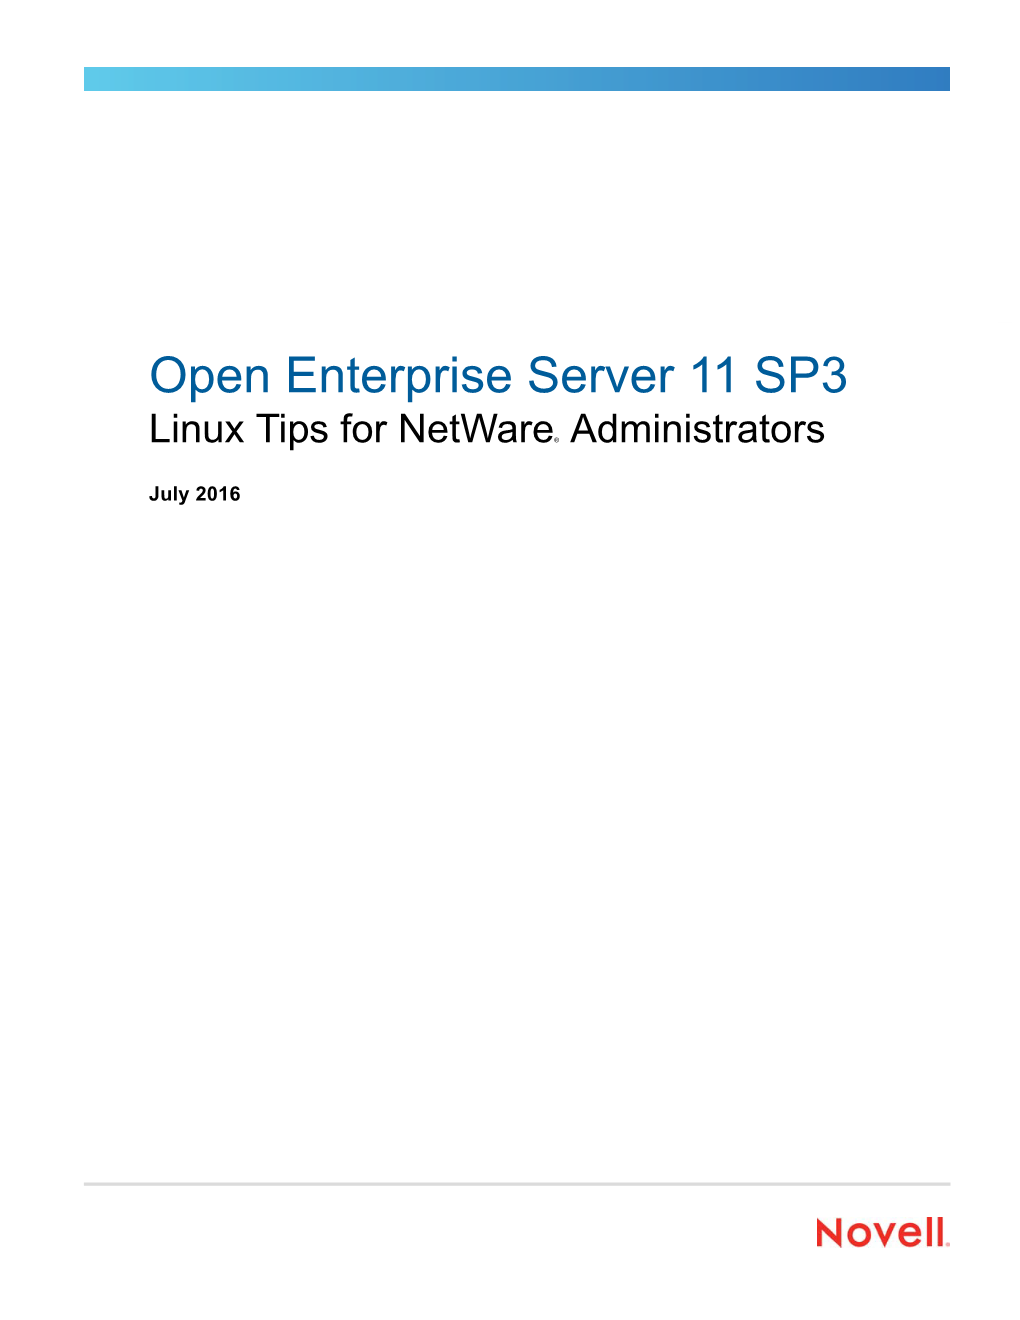 OES 11 SP3: Linux Tips for Netware Administrators About This Guide